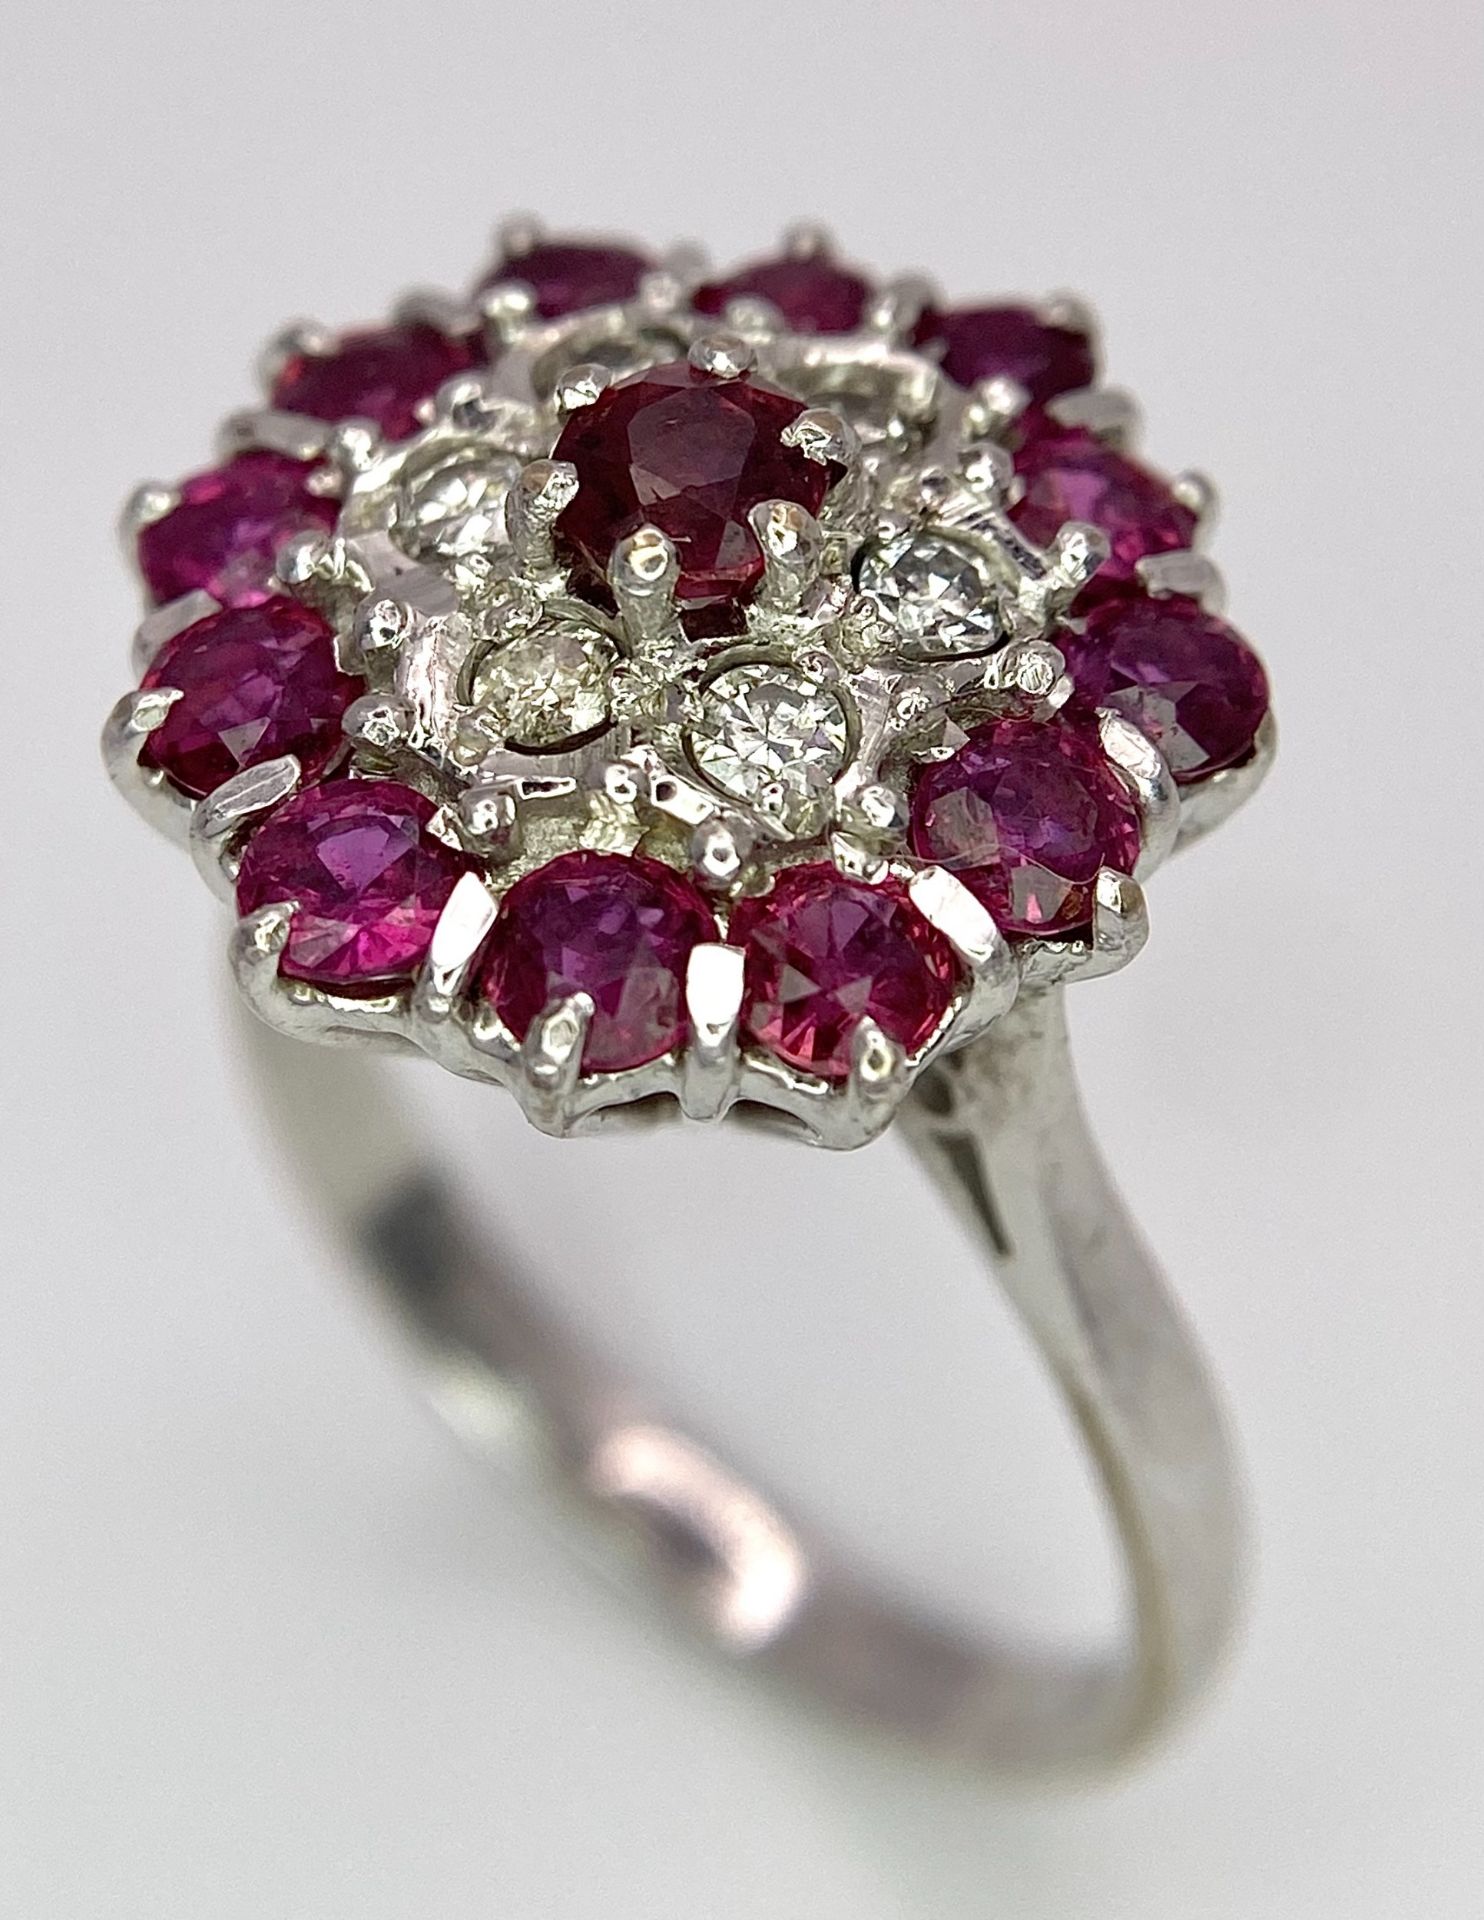 A Gorgeous 18K White Gold, Ruby and Diamond Ring. Floral design on an elevated setting. 14 rubies - Image 4 of 6